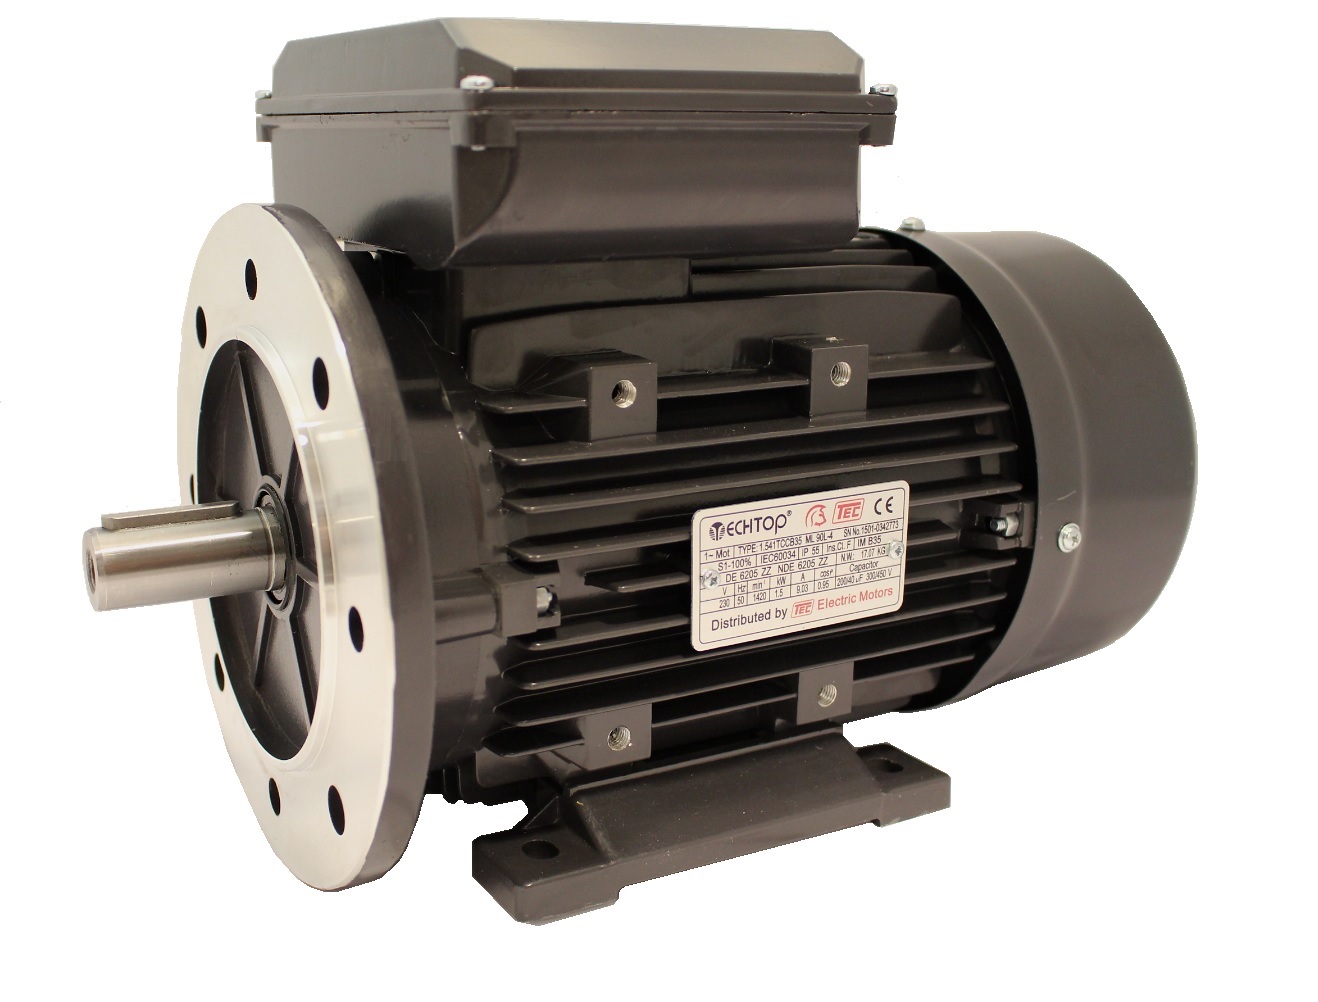 Single Phase 110v Electric Motor, 2.2Kw 2 pole 3000rpm with flange and foot mount